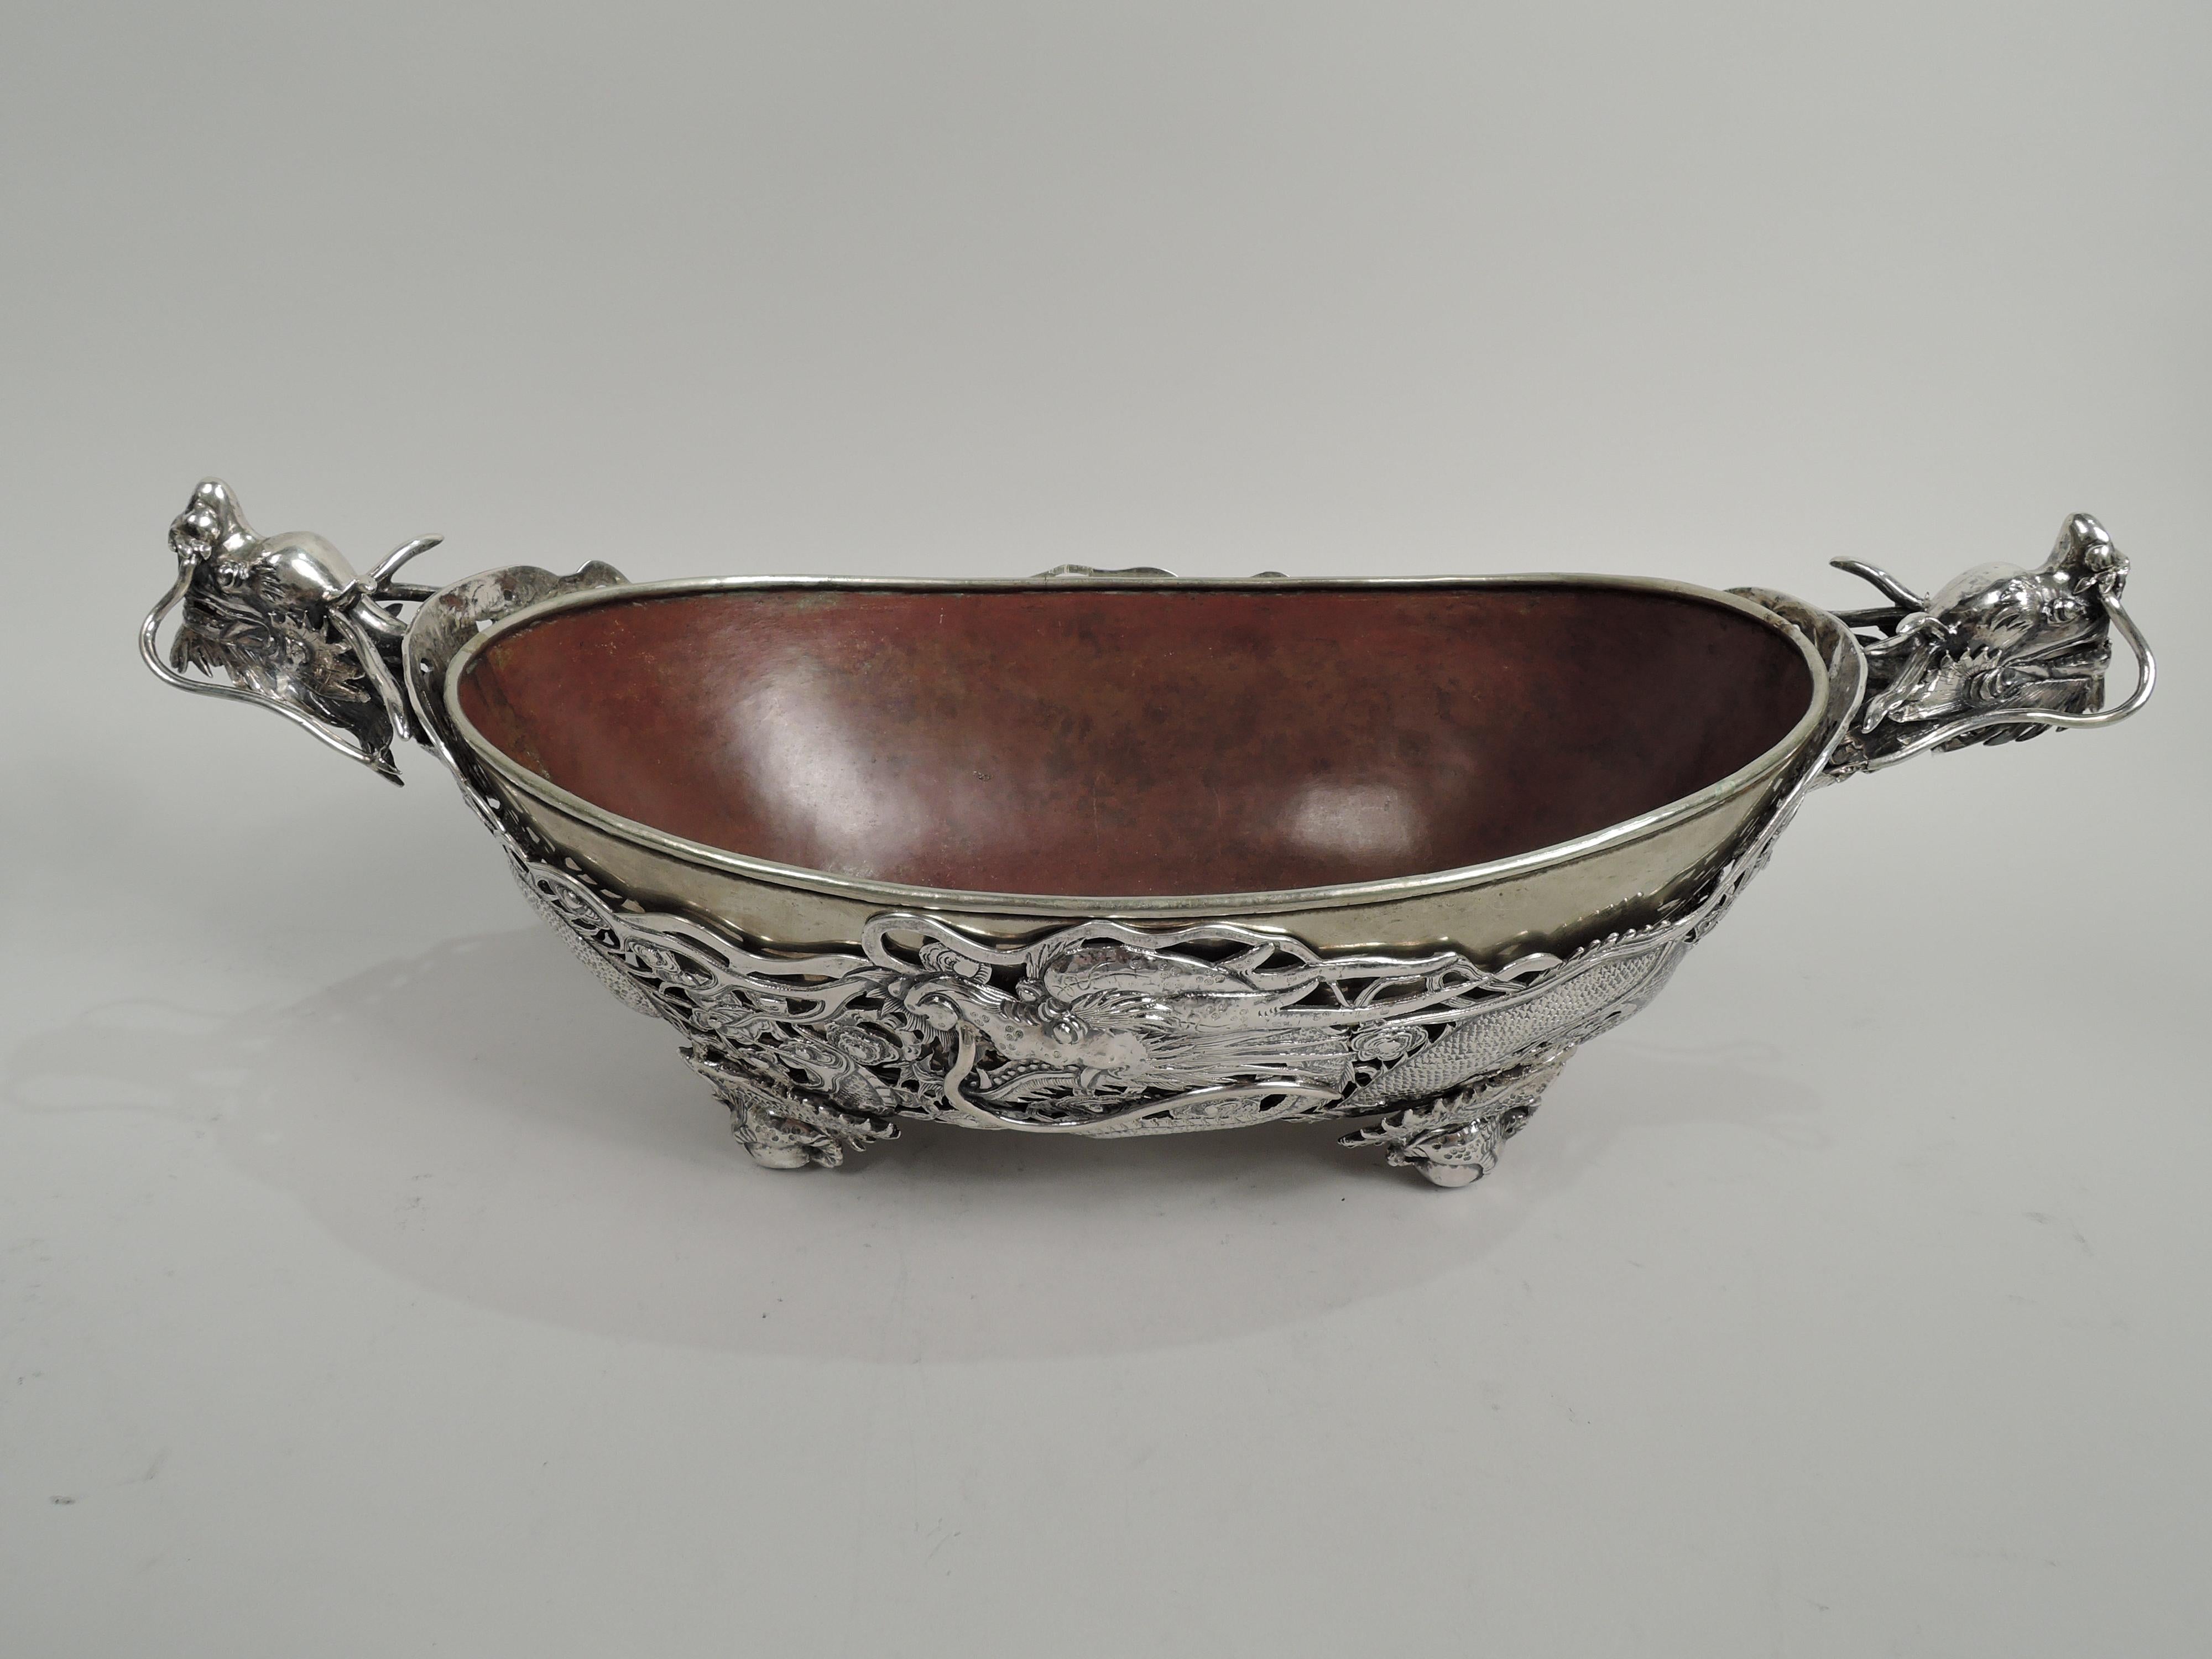 Dramatic Chinese silver centerpiece bowl, ca 1890. Oval with solid well. Sides open with scaly, slithering wraparound dragons; haunches and legs terminating in talon-gripped balls form supports. Cast heads with gaping jaws and lolling tongue.